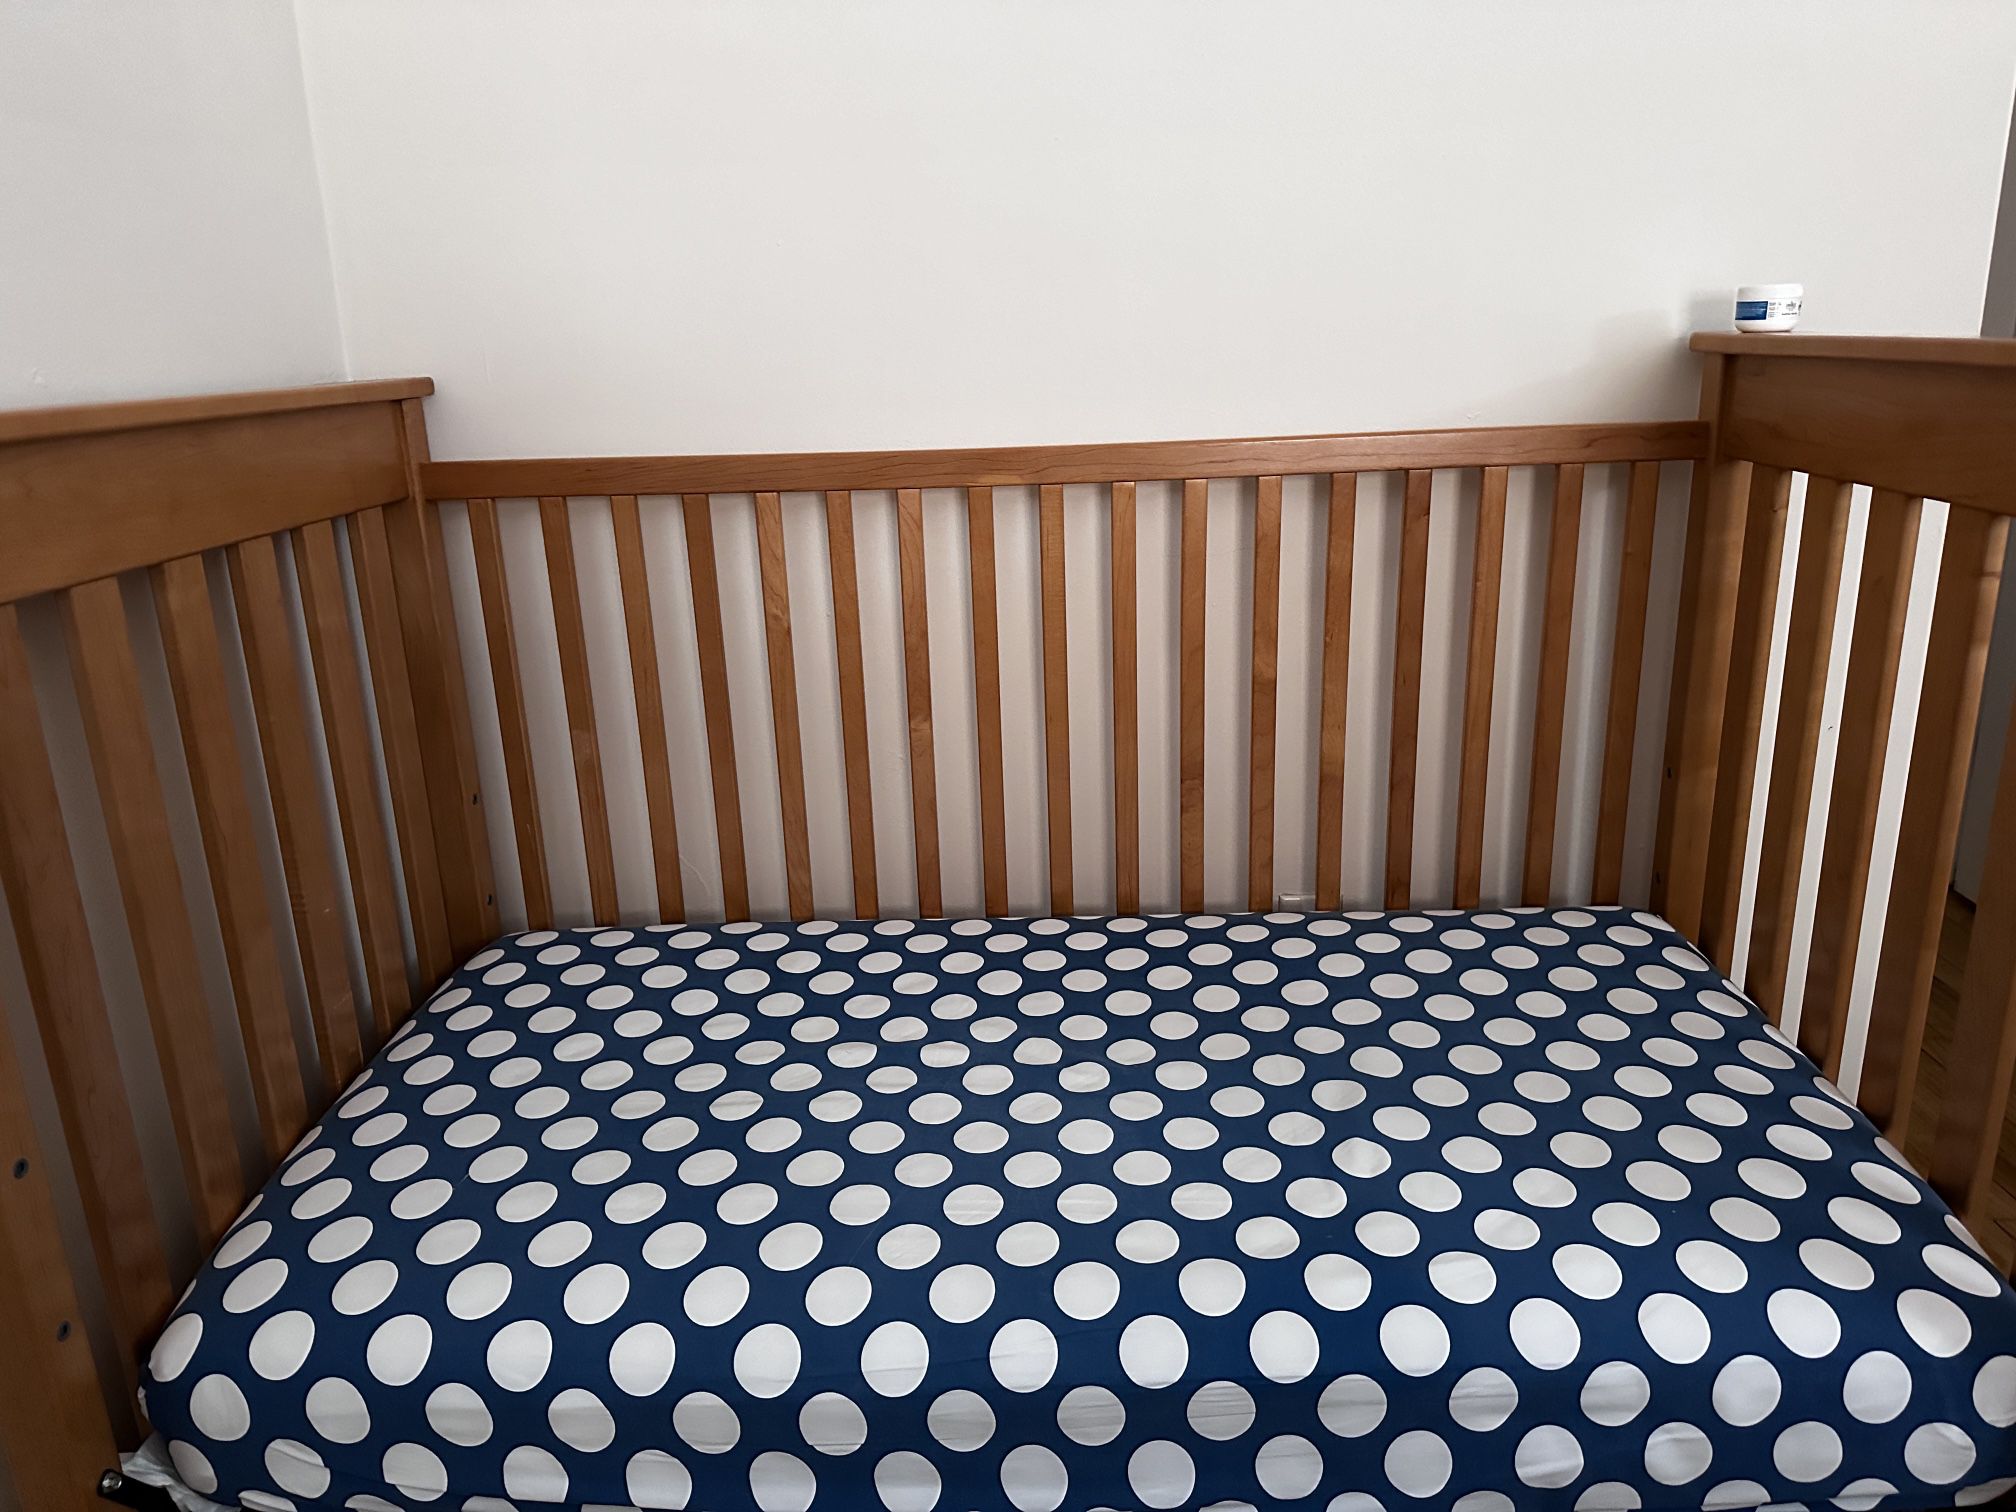 Crib In Excellent Condition.